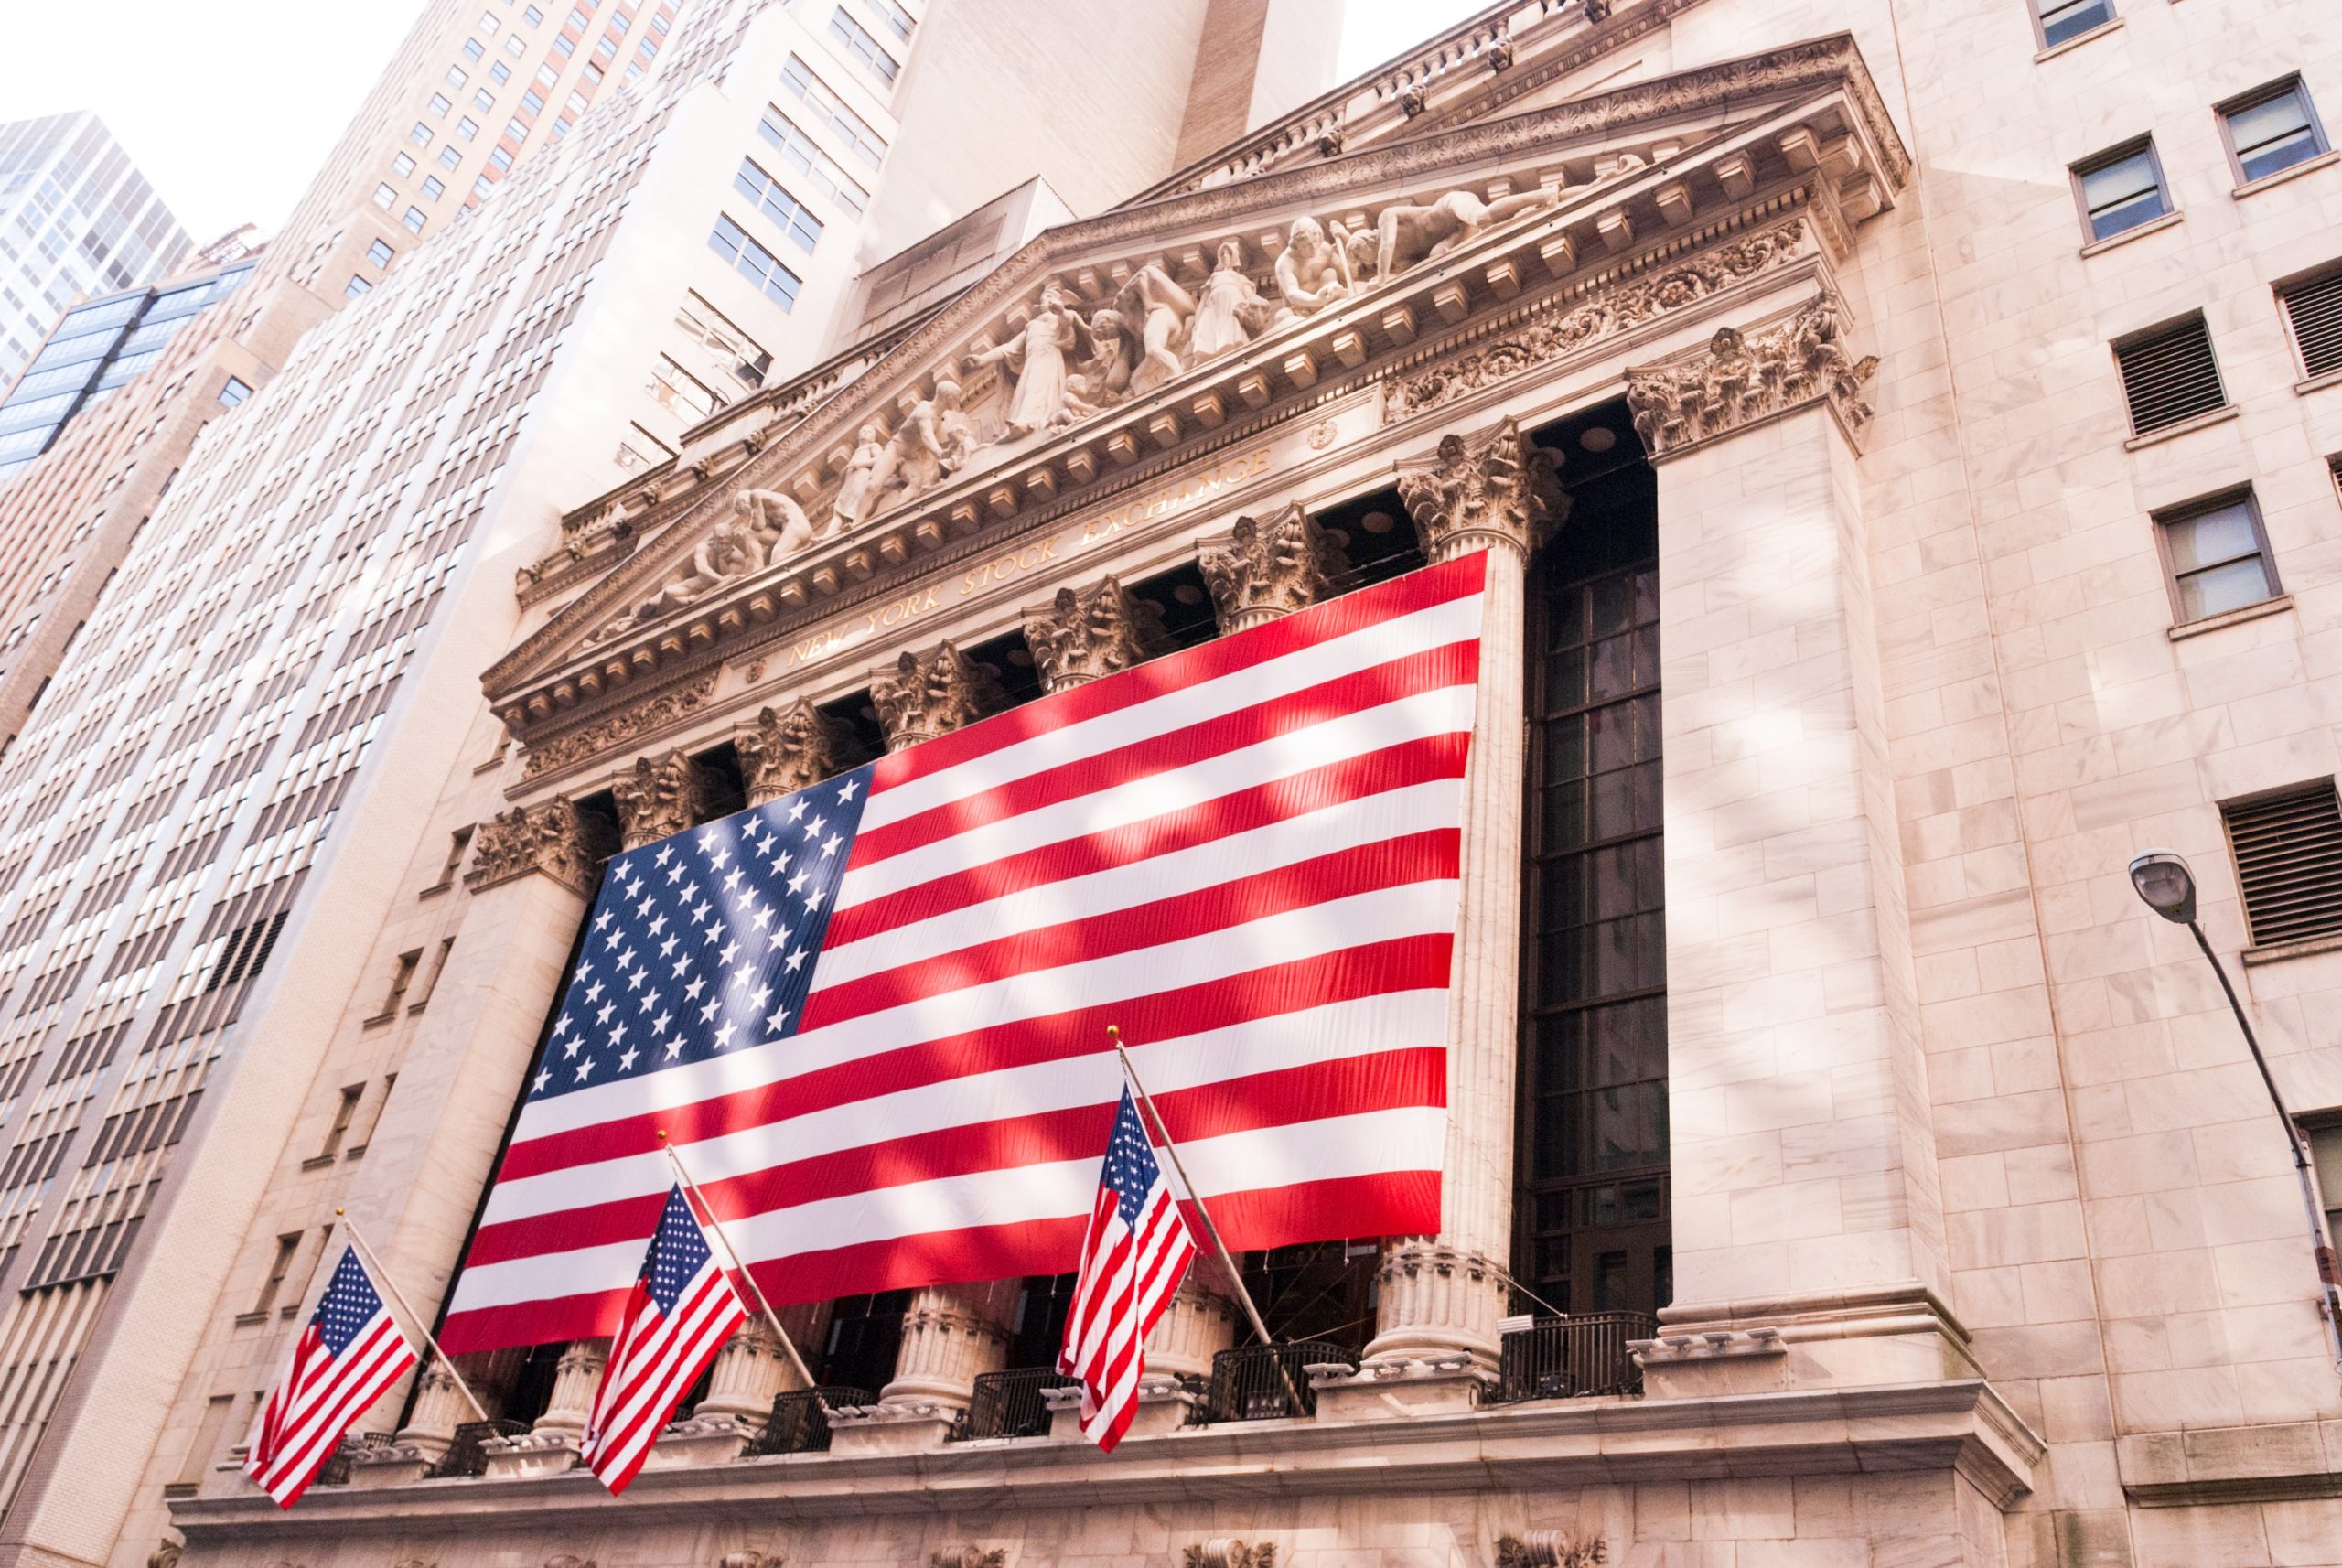 NYSE Joins NFT Craze By Launching “First Trade” Tokens